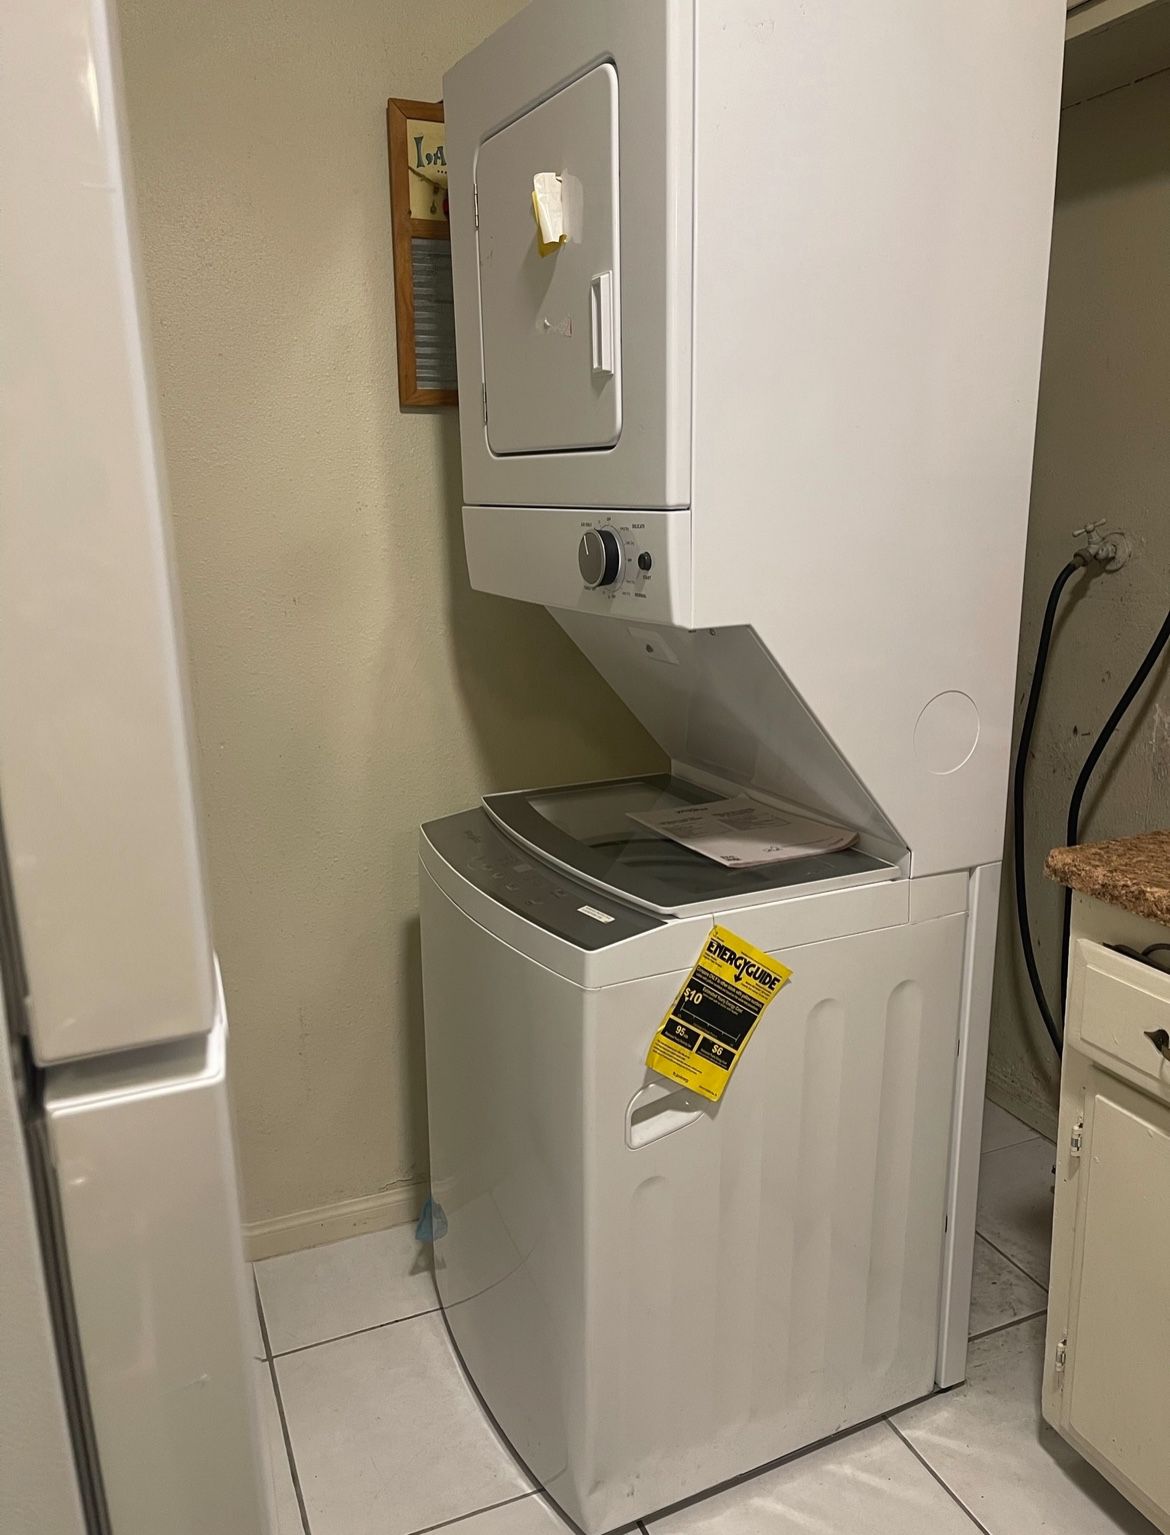 Whirlpool Stacked Washer & Dryer